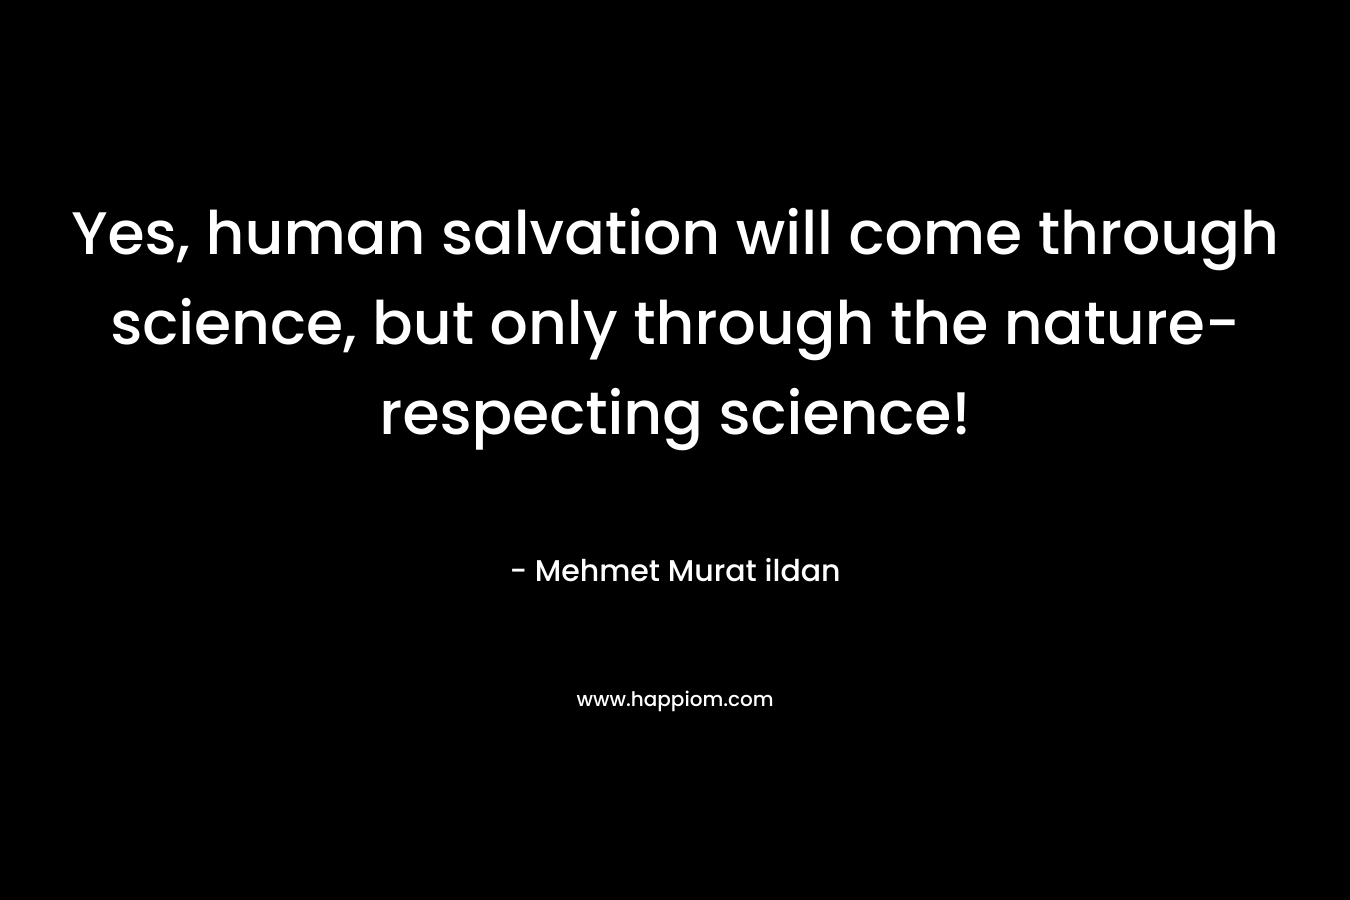 Yes, human salvation will come through science, but only through the nature-respecting science! – Mehmet Murat ildan